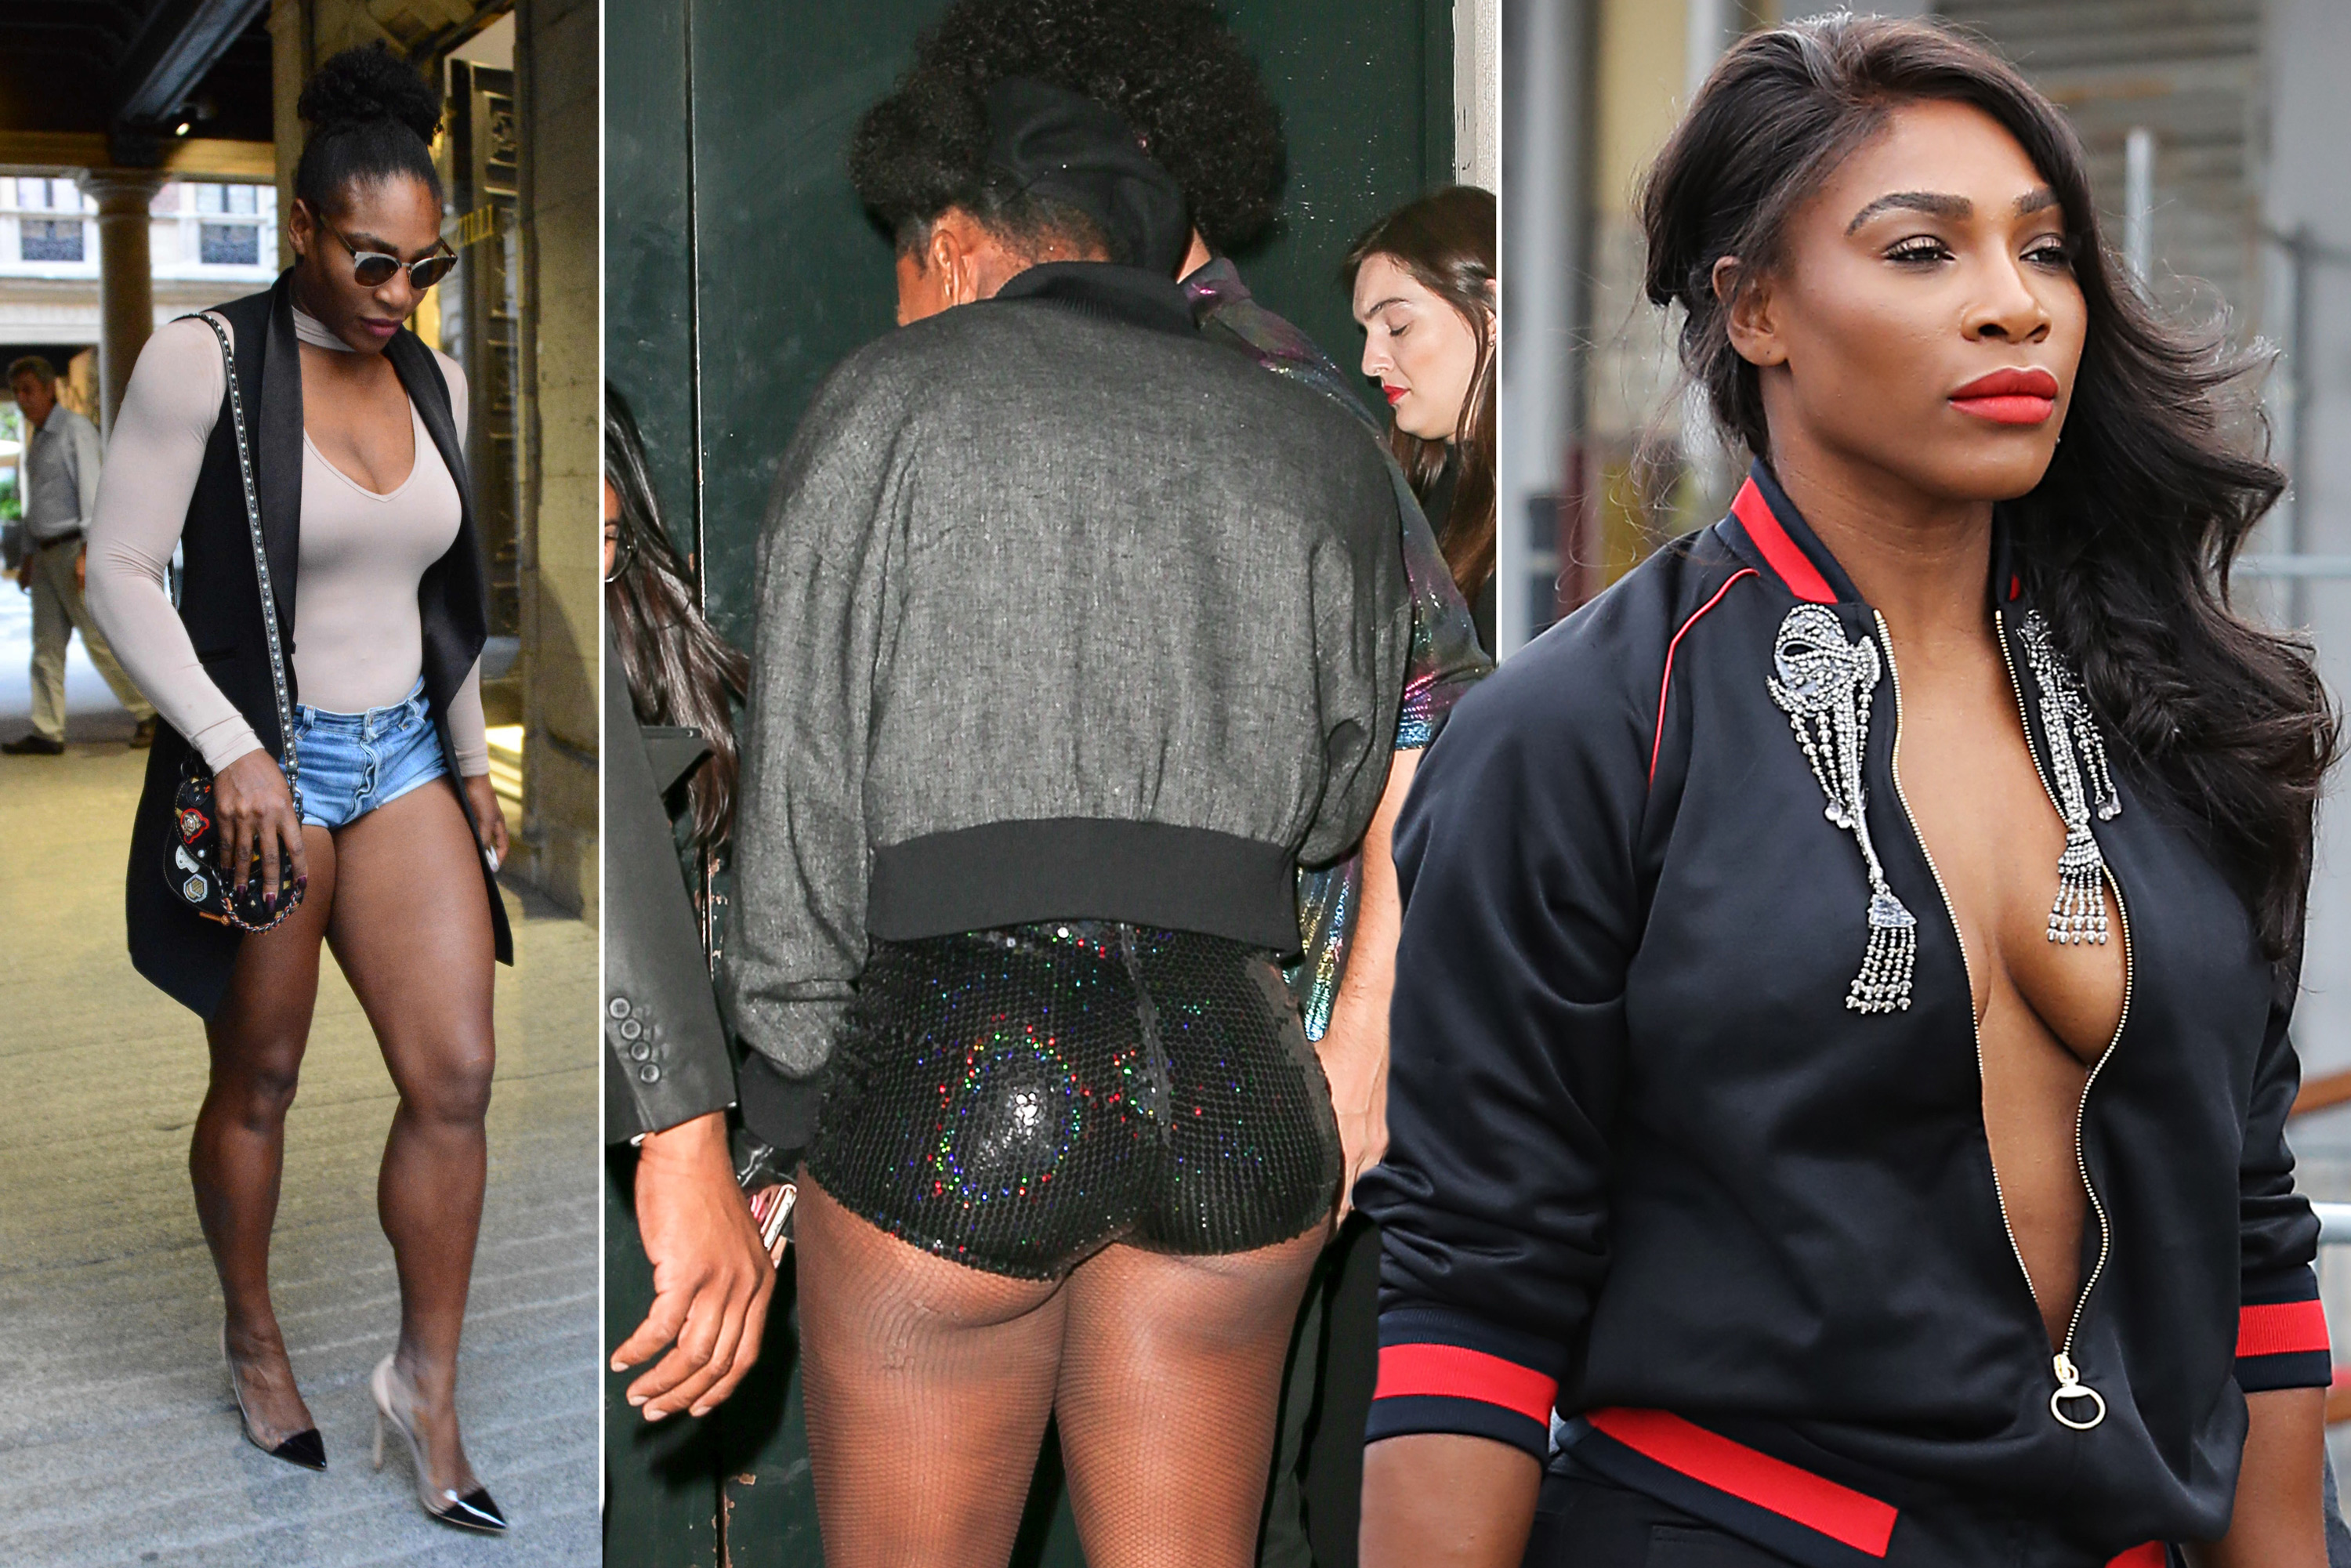 craig mcardle share serena williams leaked pictures photos